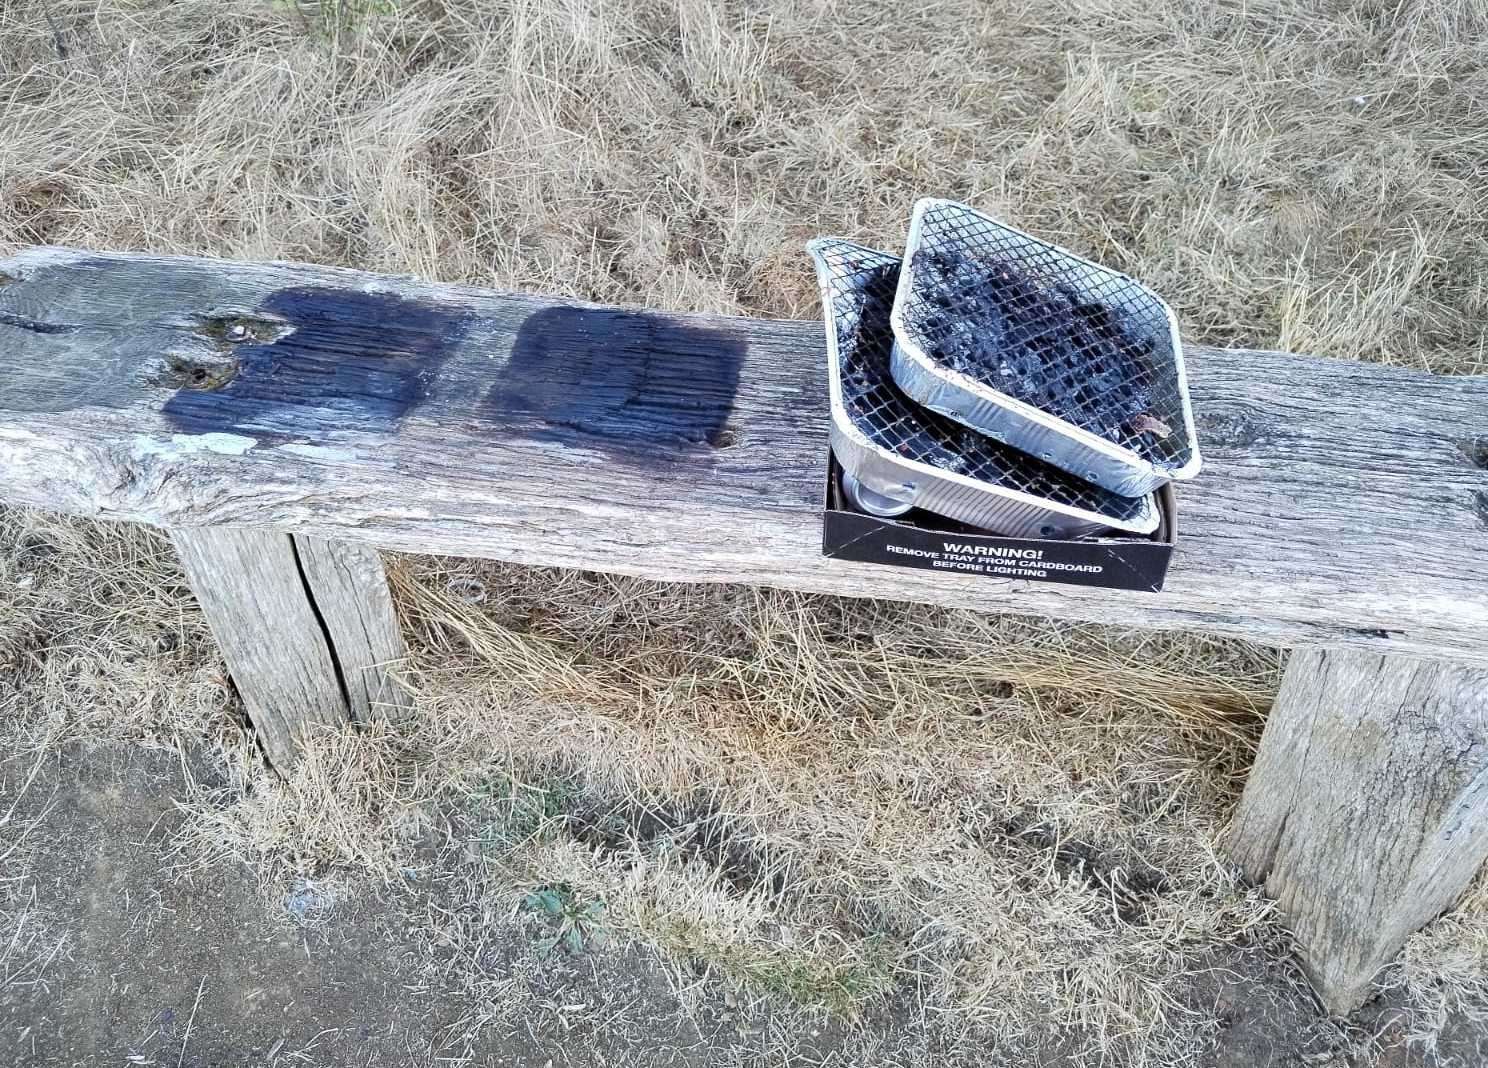 There were concerns about the use of disposable grills during last year’s drought